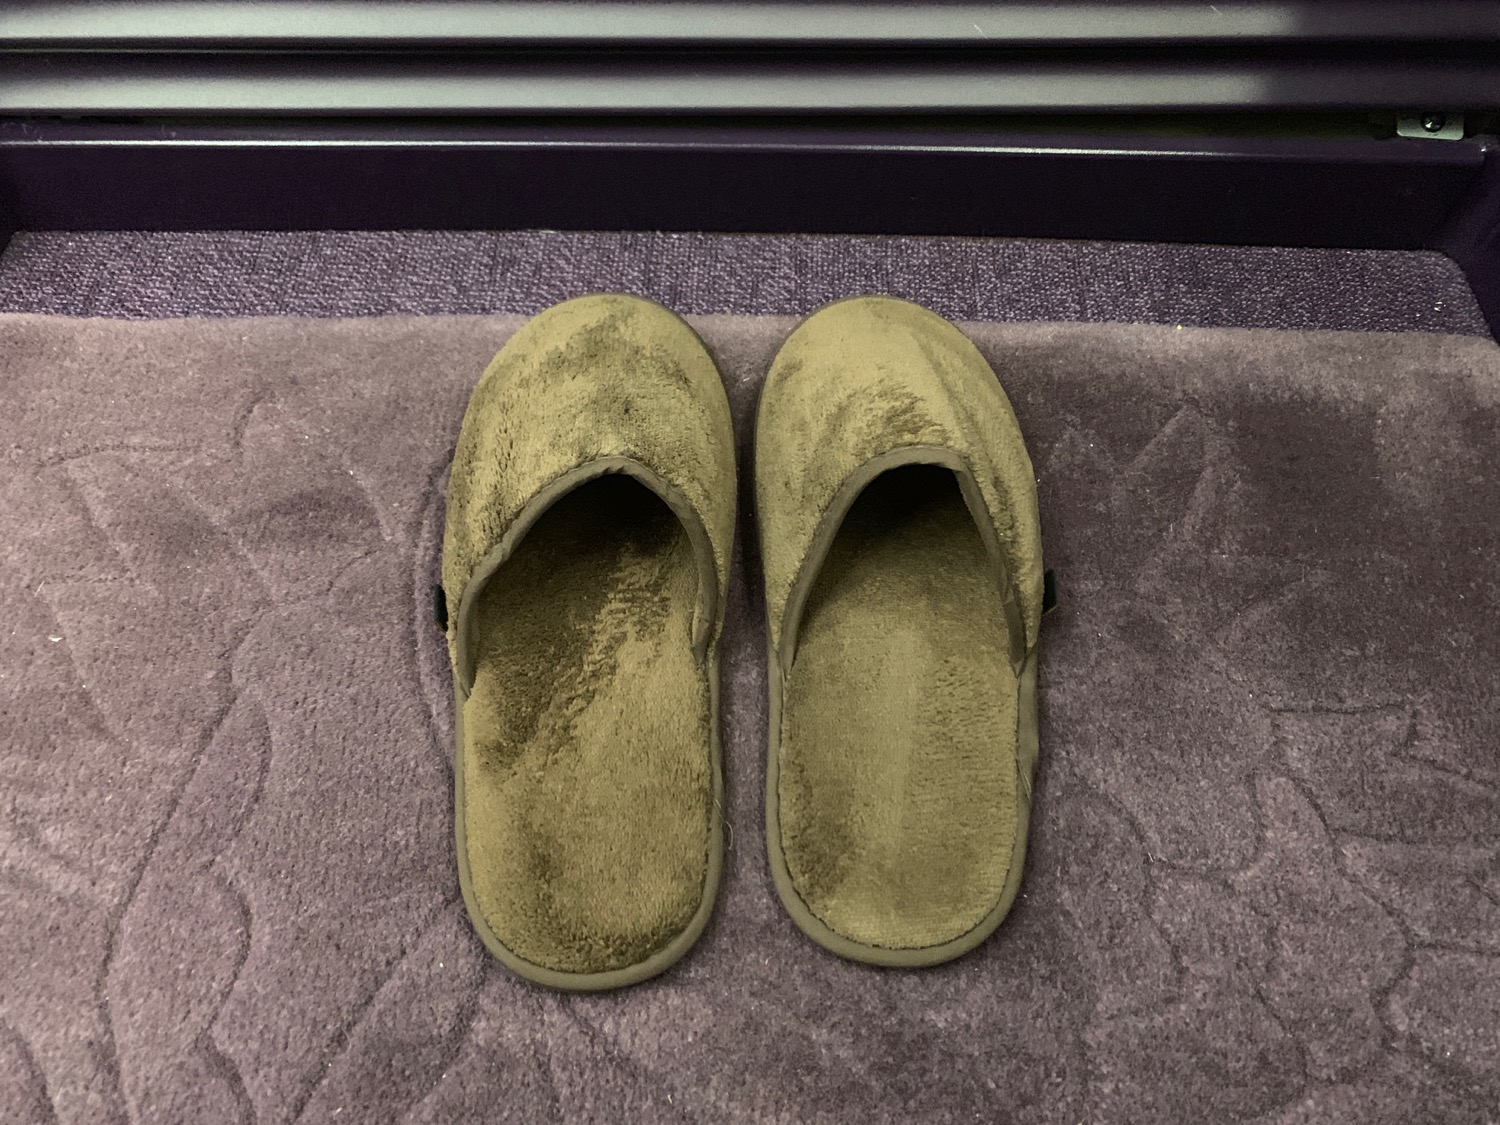 a pair of slippers on a rug